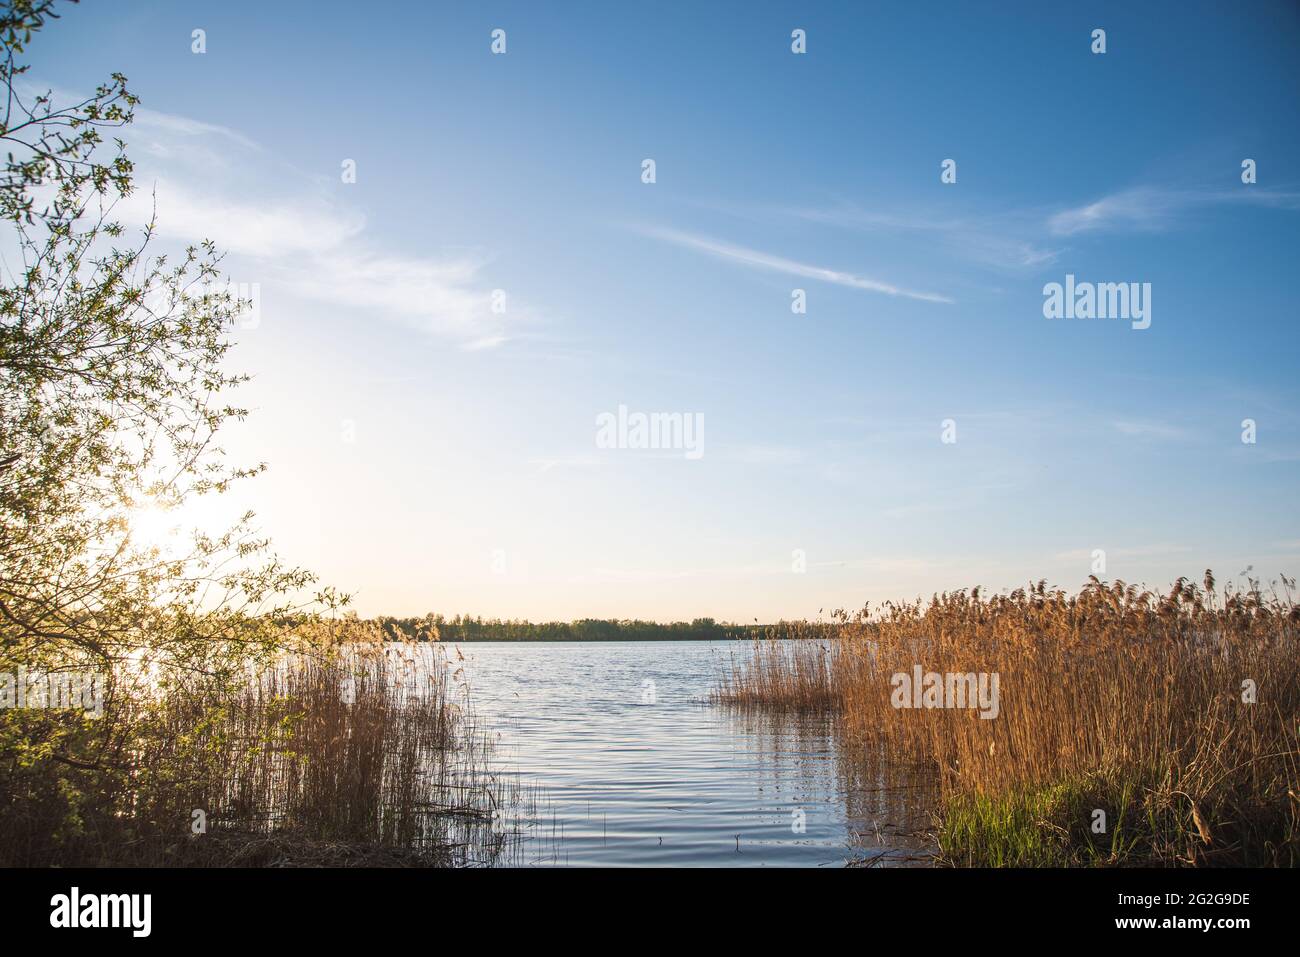 Green bank of a lake. Saturated colors. Stock Photo